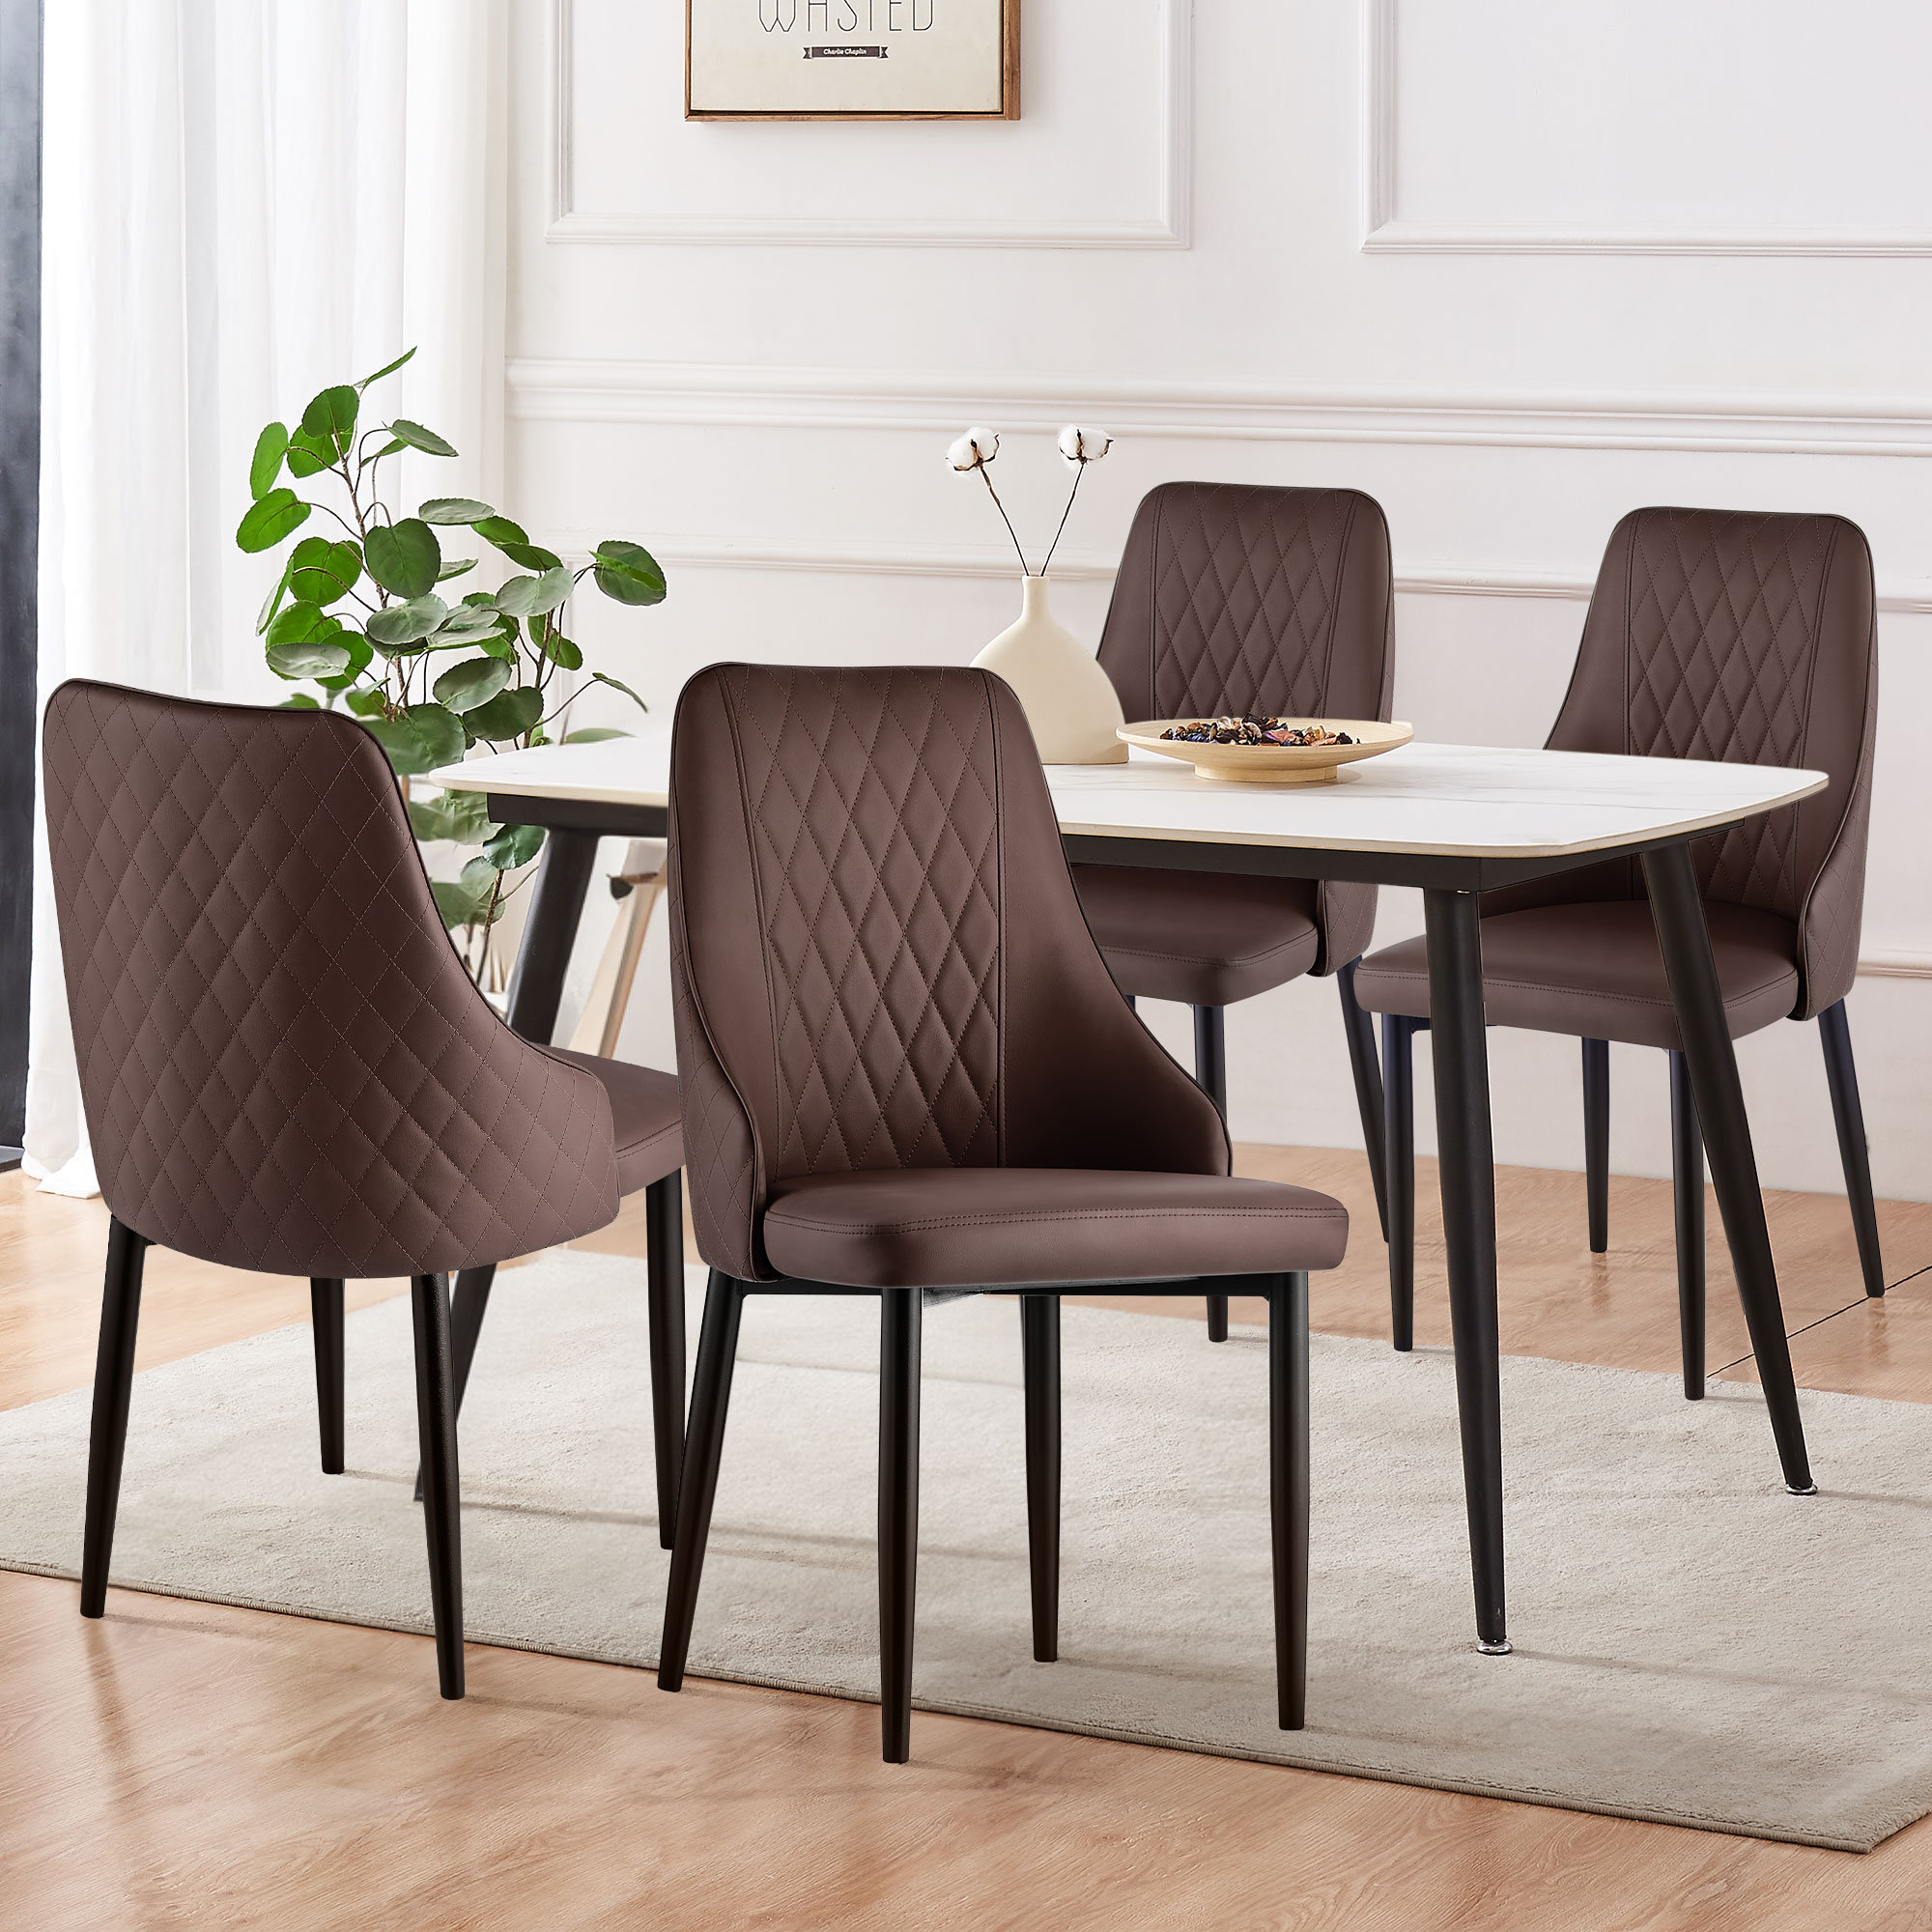 Dining Chairs Set of 4,Washable PU Leather Dining Chair Cushion